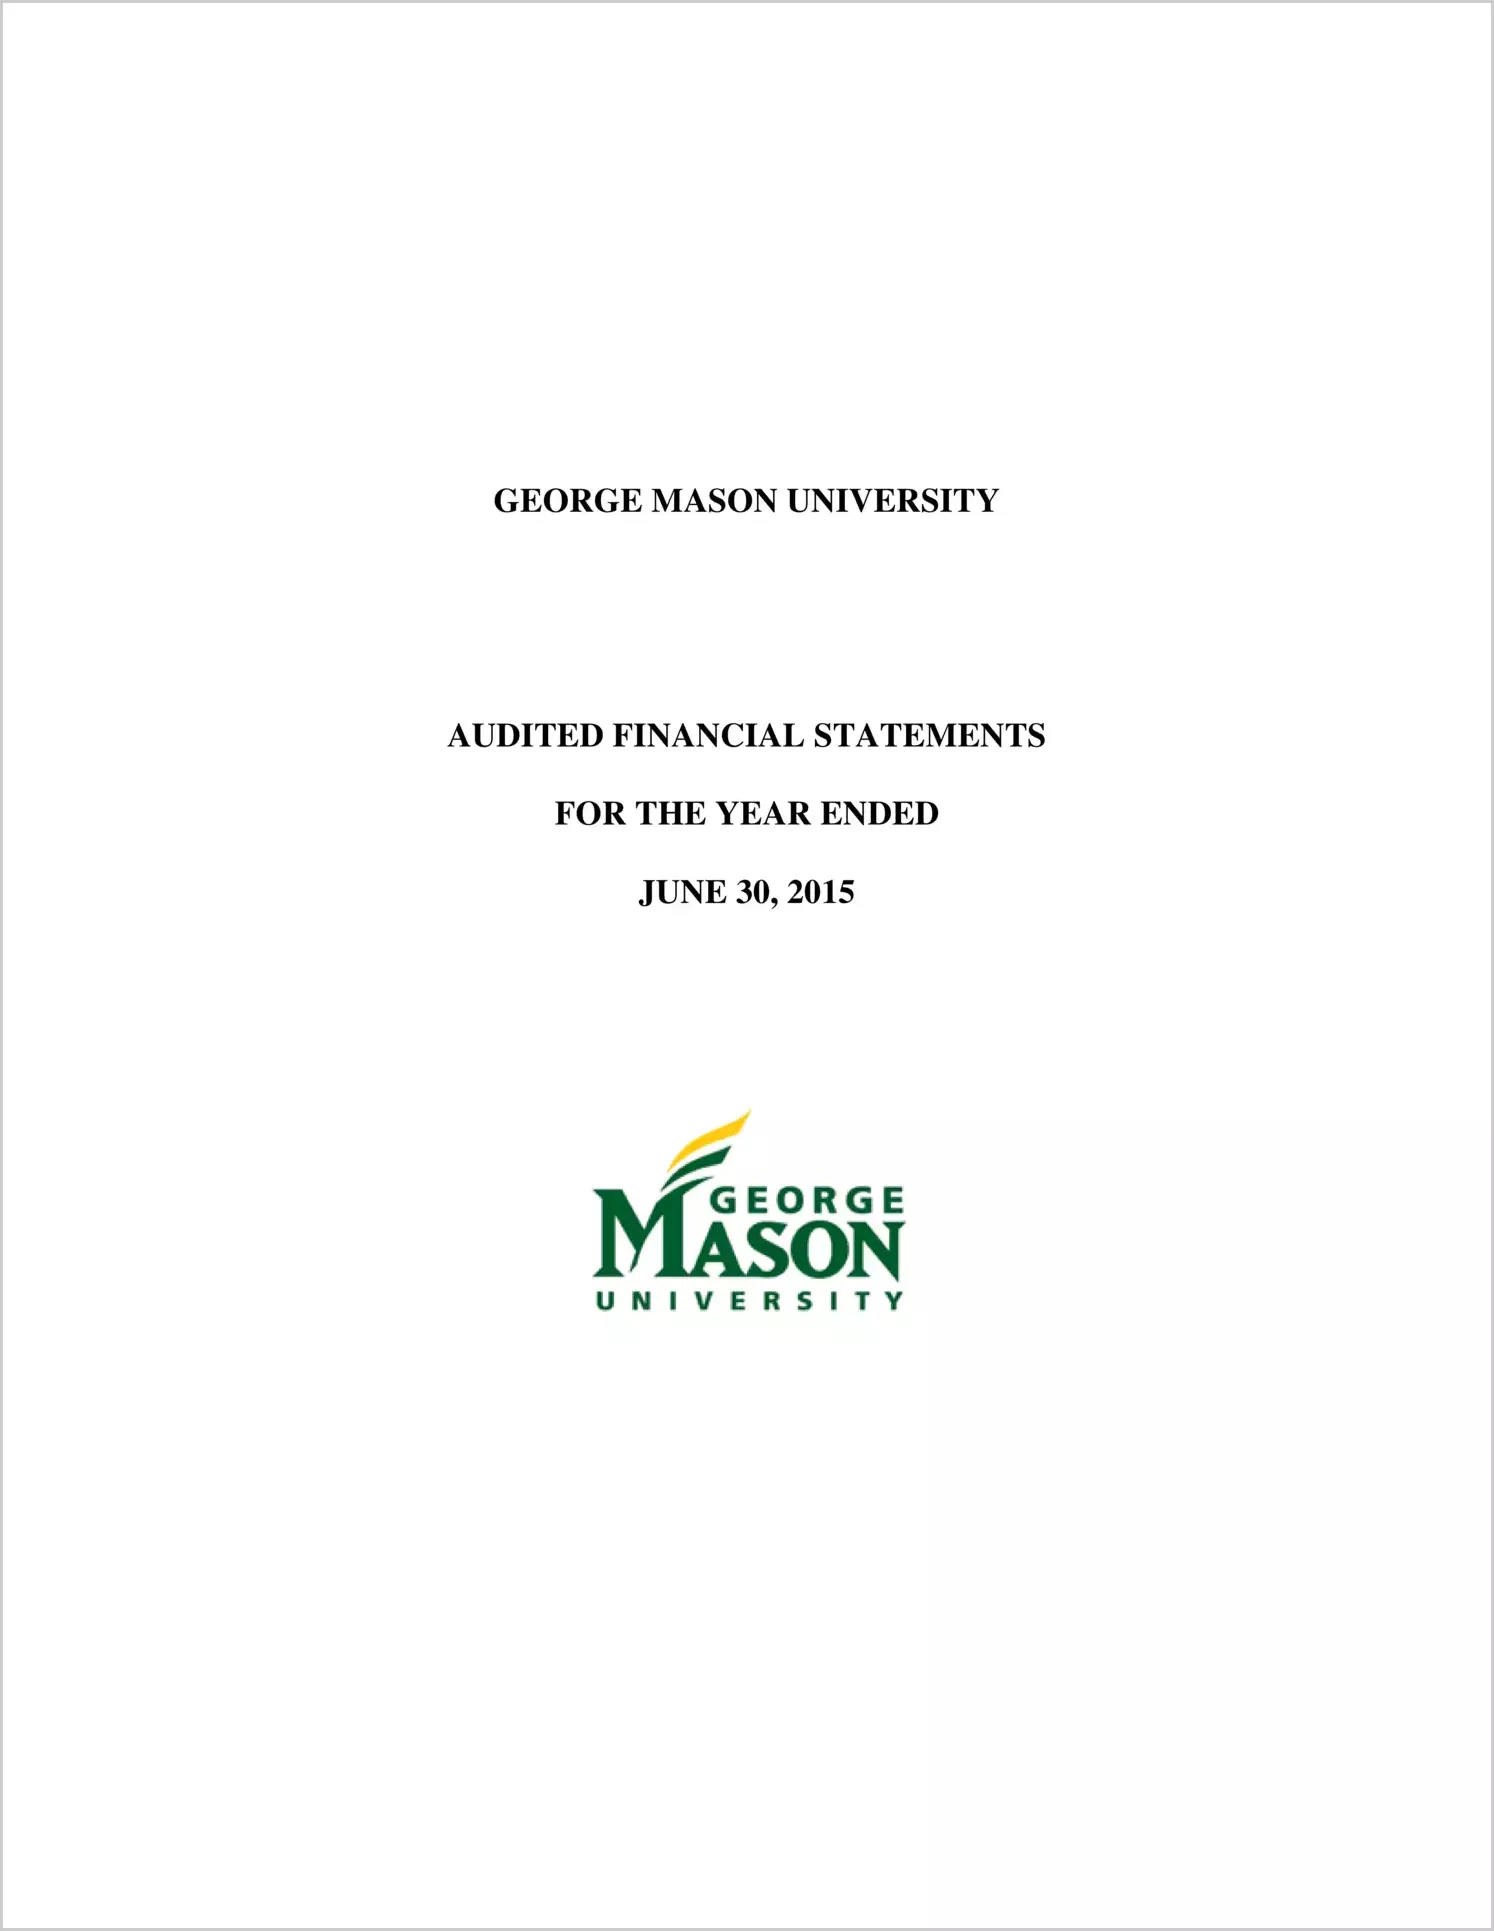 George Mason University Financial Statements for the year ended June 30, 2015